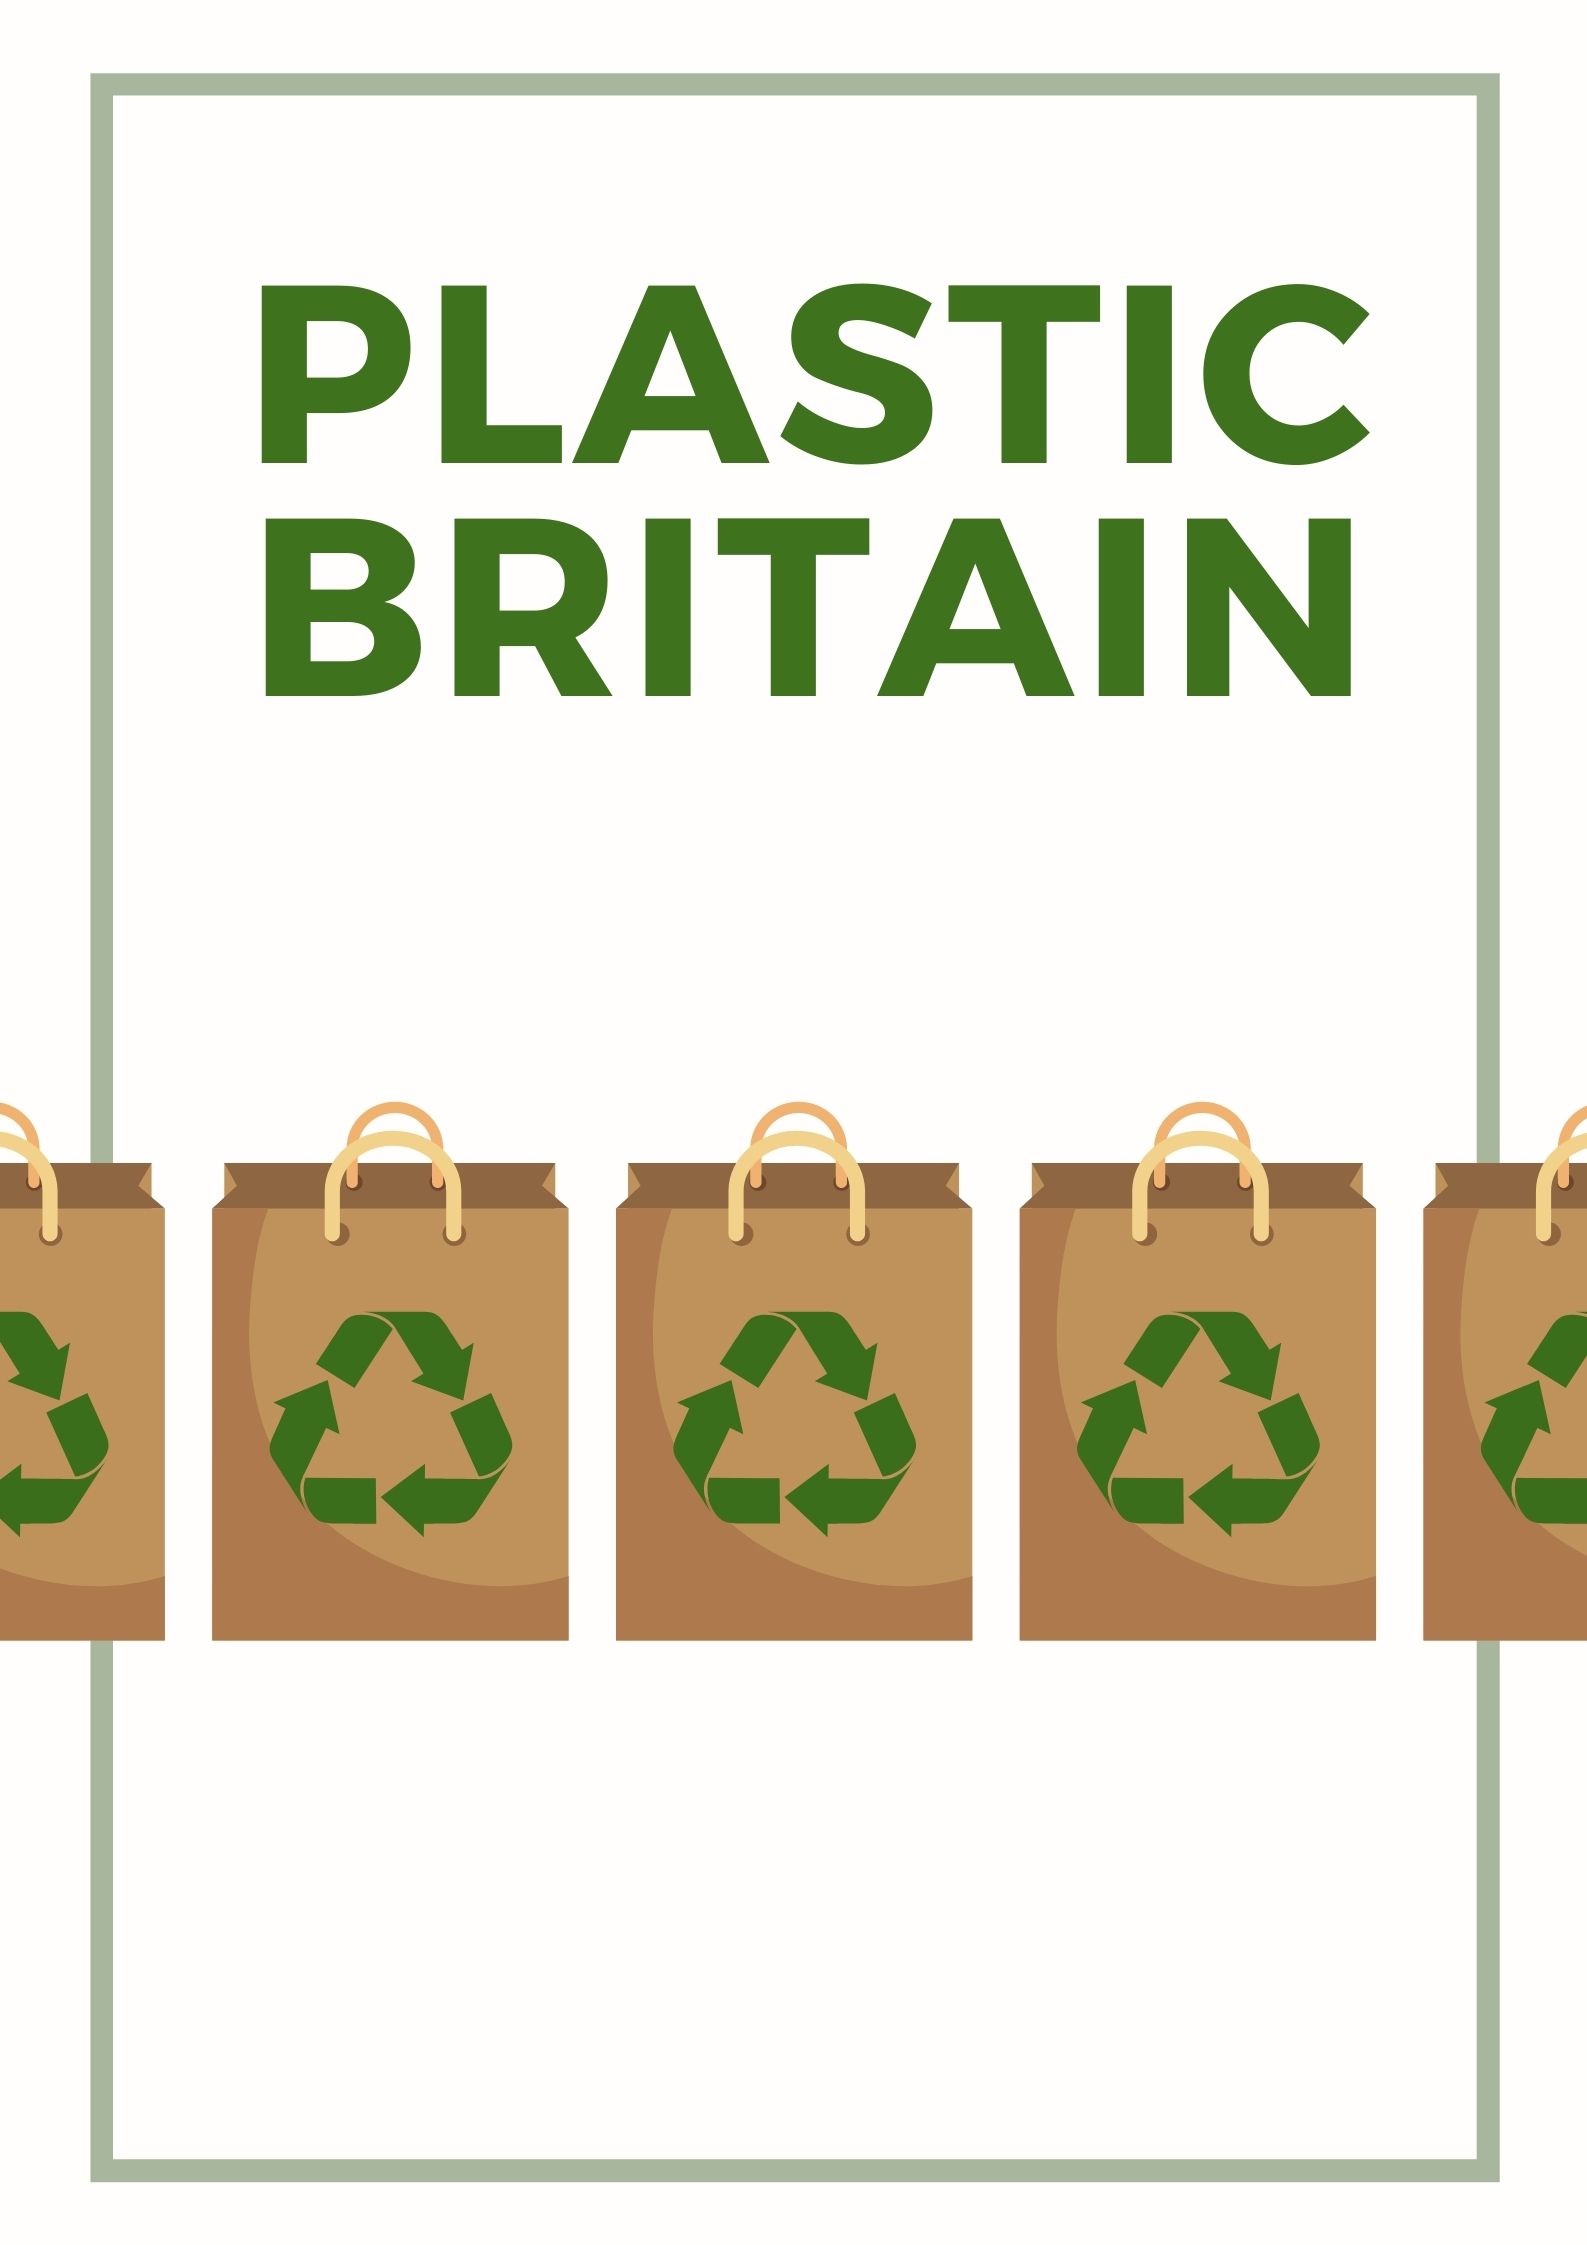 Plastic Britain: On Our Watch (2020) постер